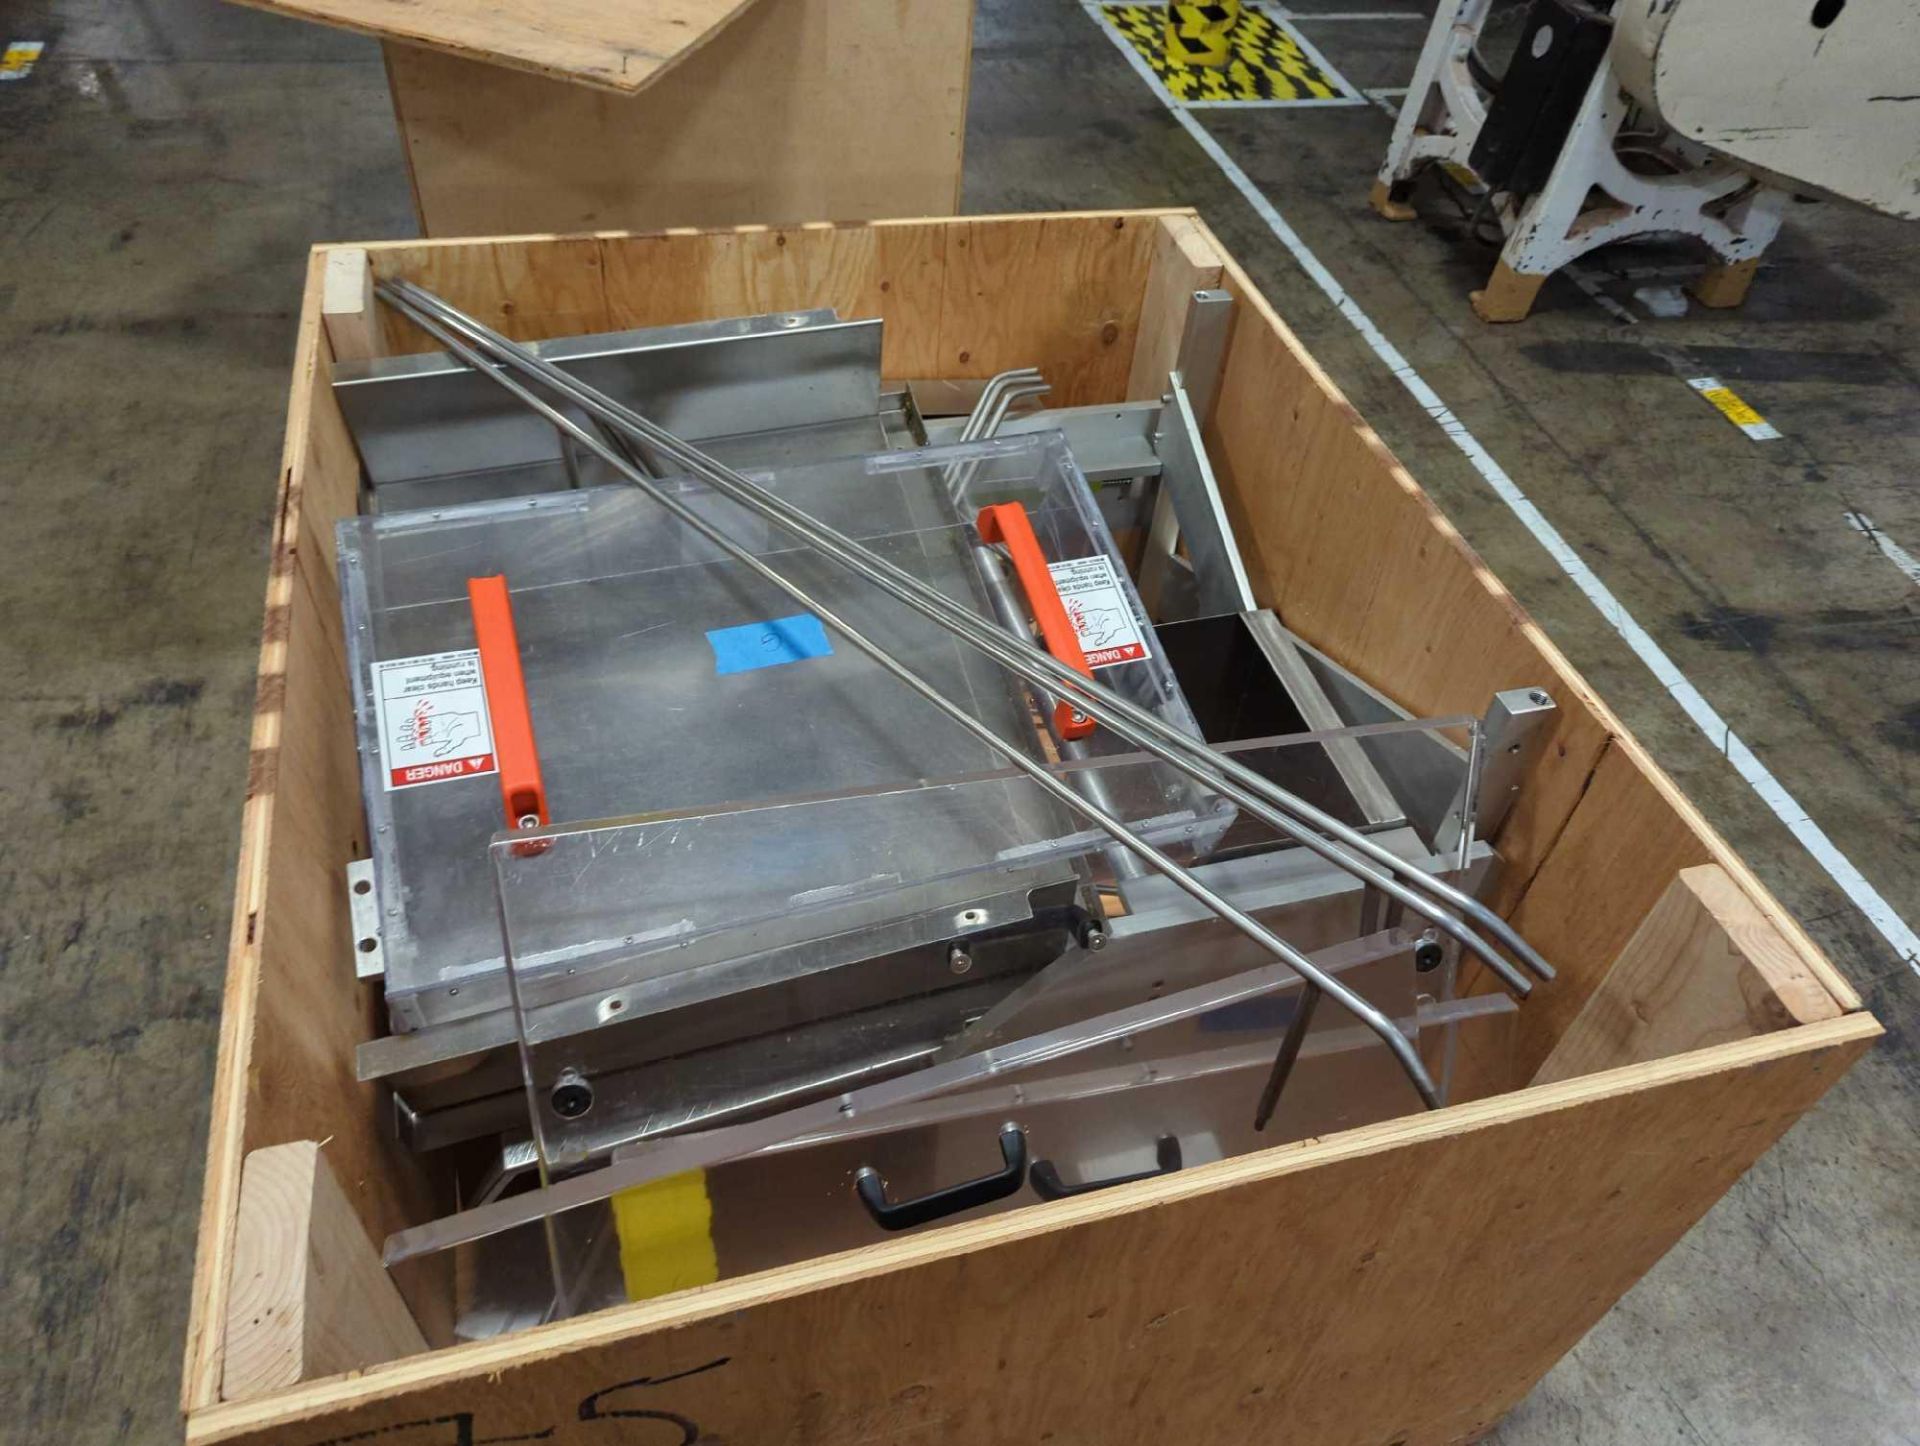 VC999 RS560 Rollstock Thermoformer Vacuum Packaging Machine - Image 35 of 37